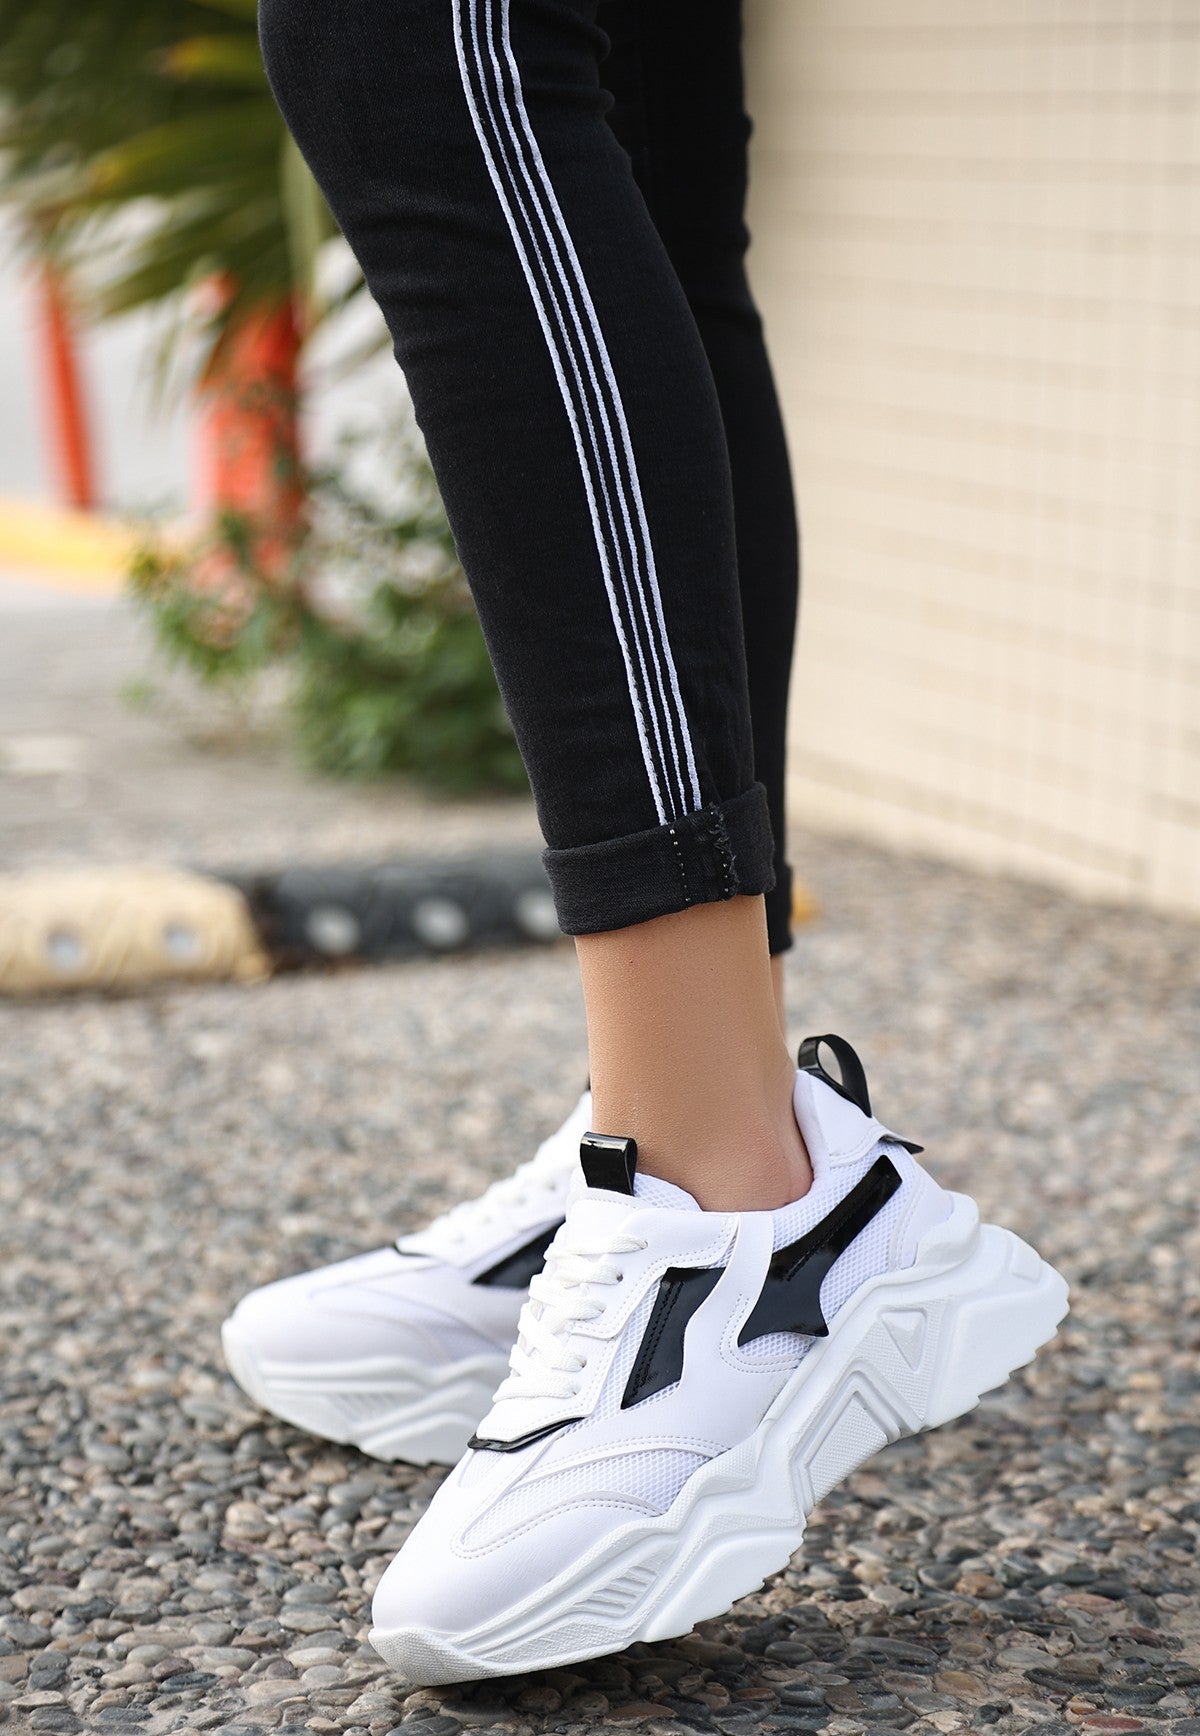 Women's White Leather Black Detailed Lace-Up Sports Shoes - STREETMODE ™